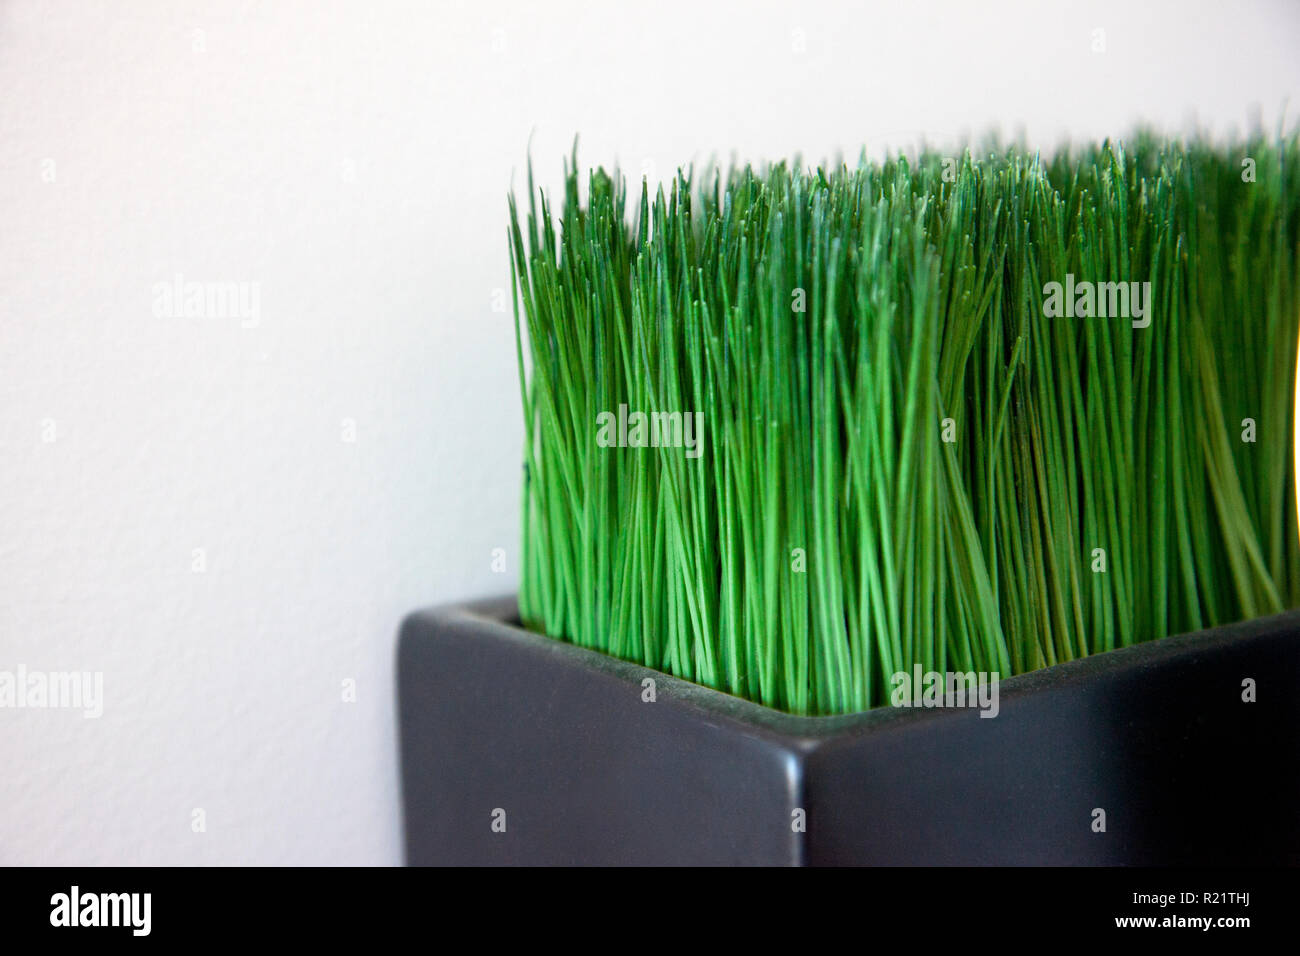 Green cat grass or fake grass plant with copy space Stock Photo